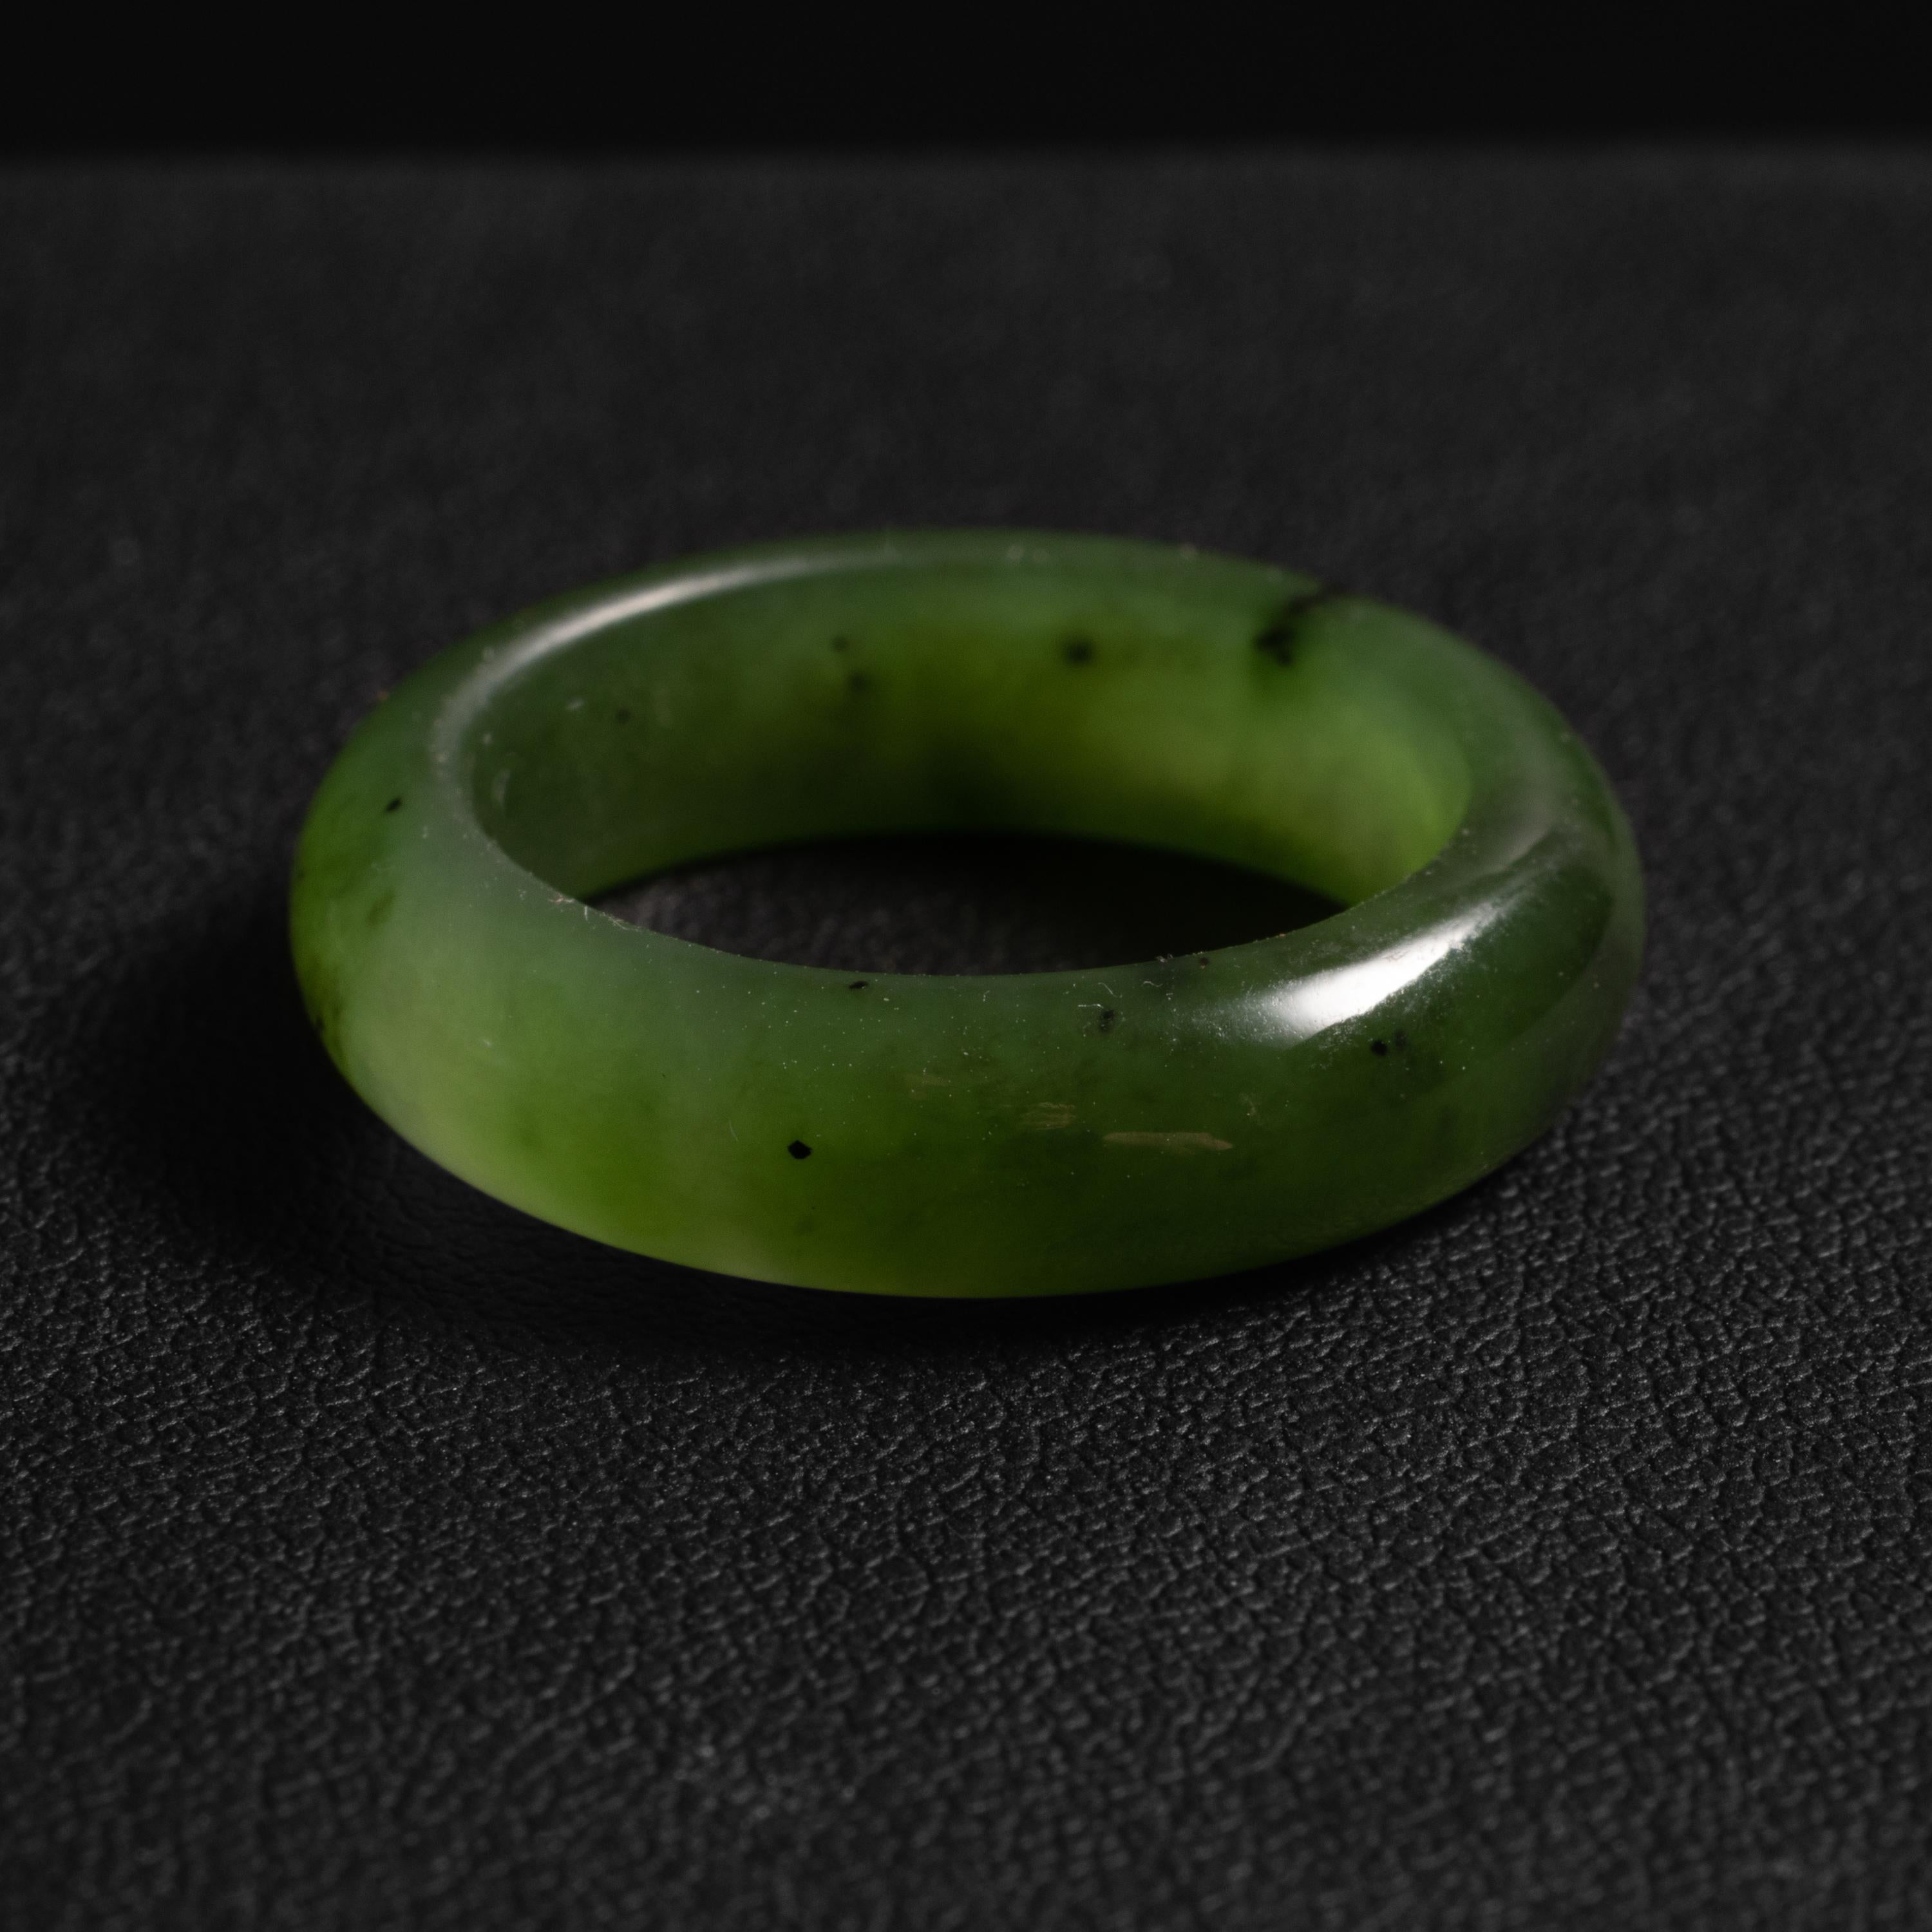 This translucent olive-green band ring was hand-carved from natural and untreated nephrite jade.  The ring is a size 8 ¾. 

The luminous band has a high-polish outside, a matt-finish on the interior. It's a very comfortable ring to wear and because